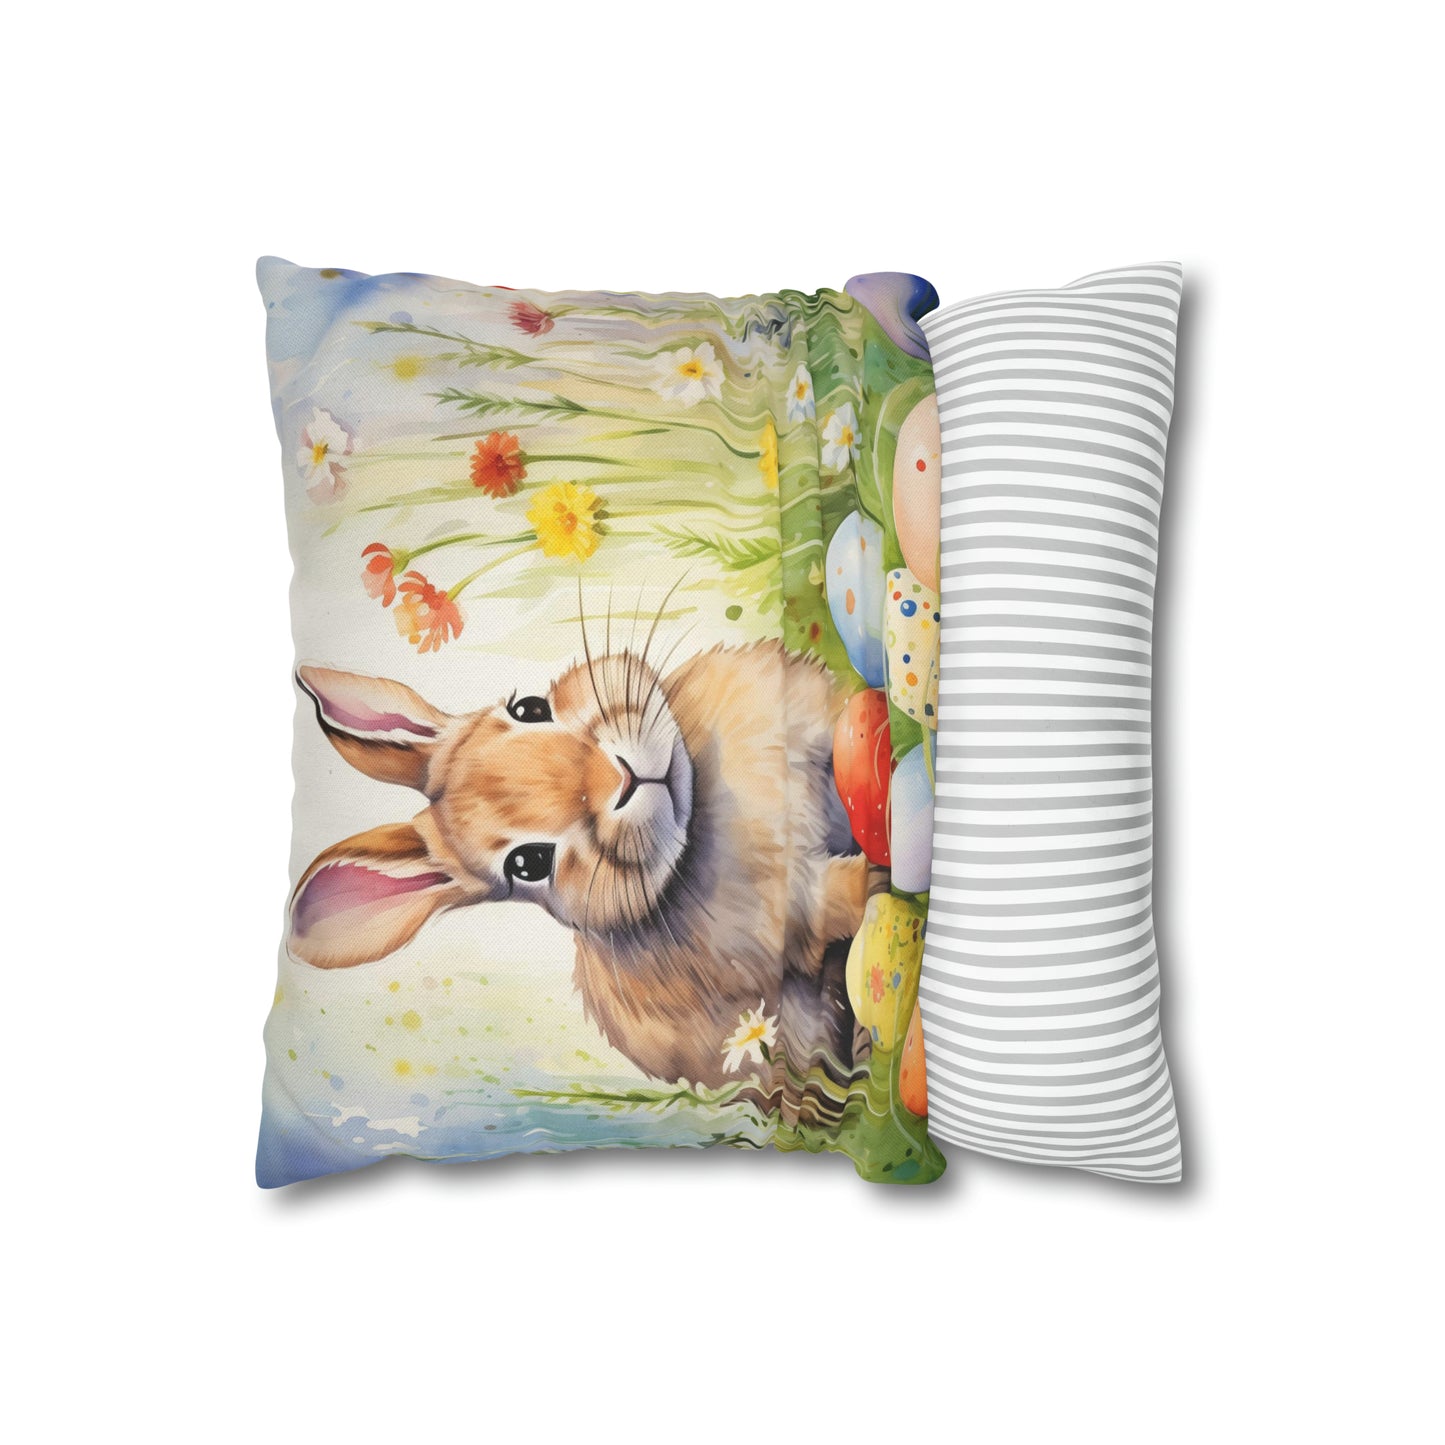 Rabbit Easter Eggs Pillow Case, Bunny Spring Flowers Square Throw Decorative Cover Room Décor Couch Cushion 20 x 20 Zipper Sofa